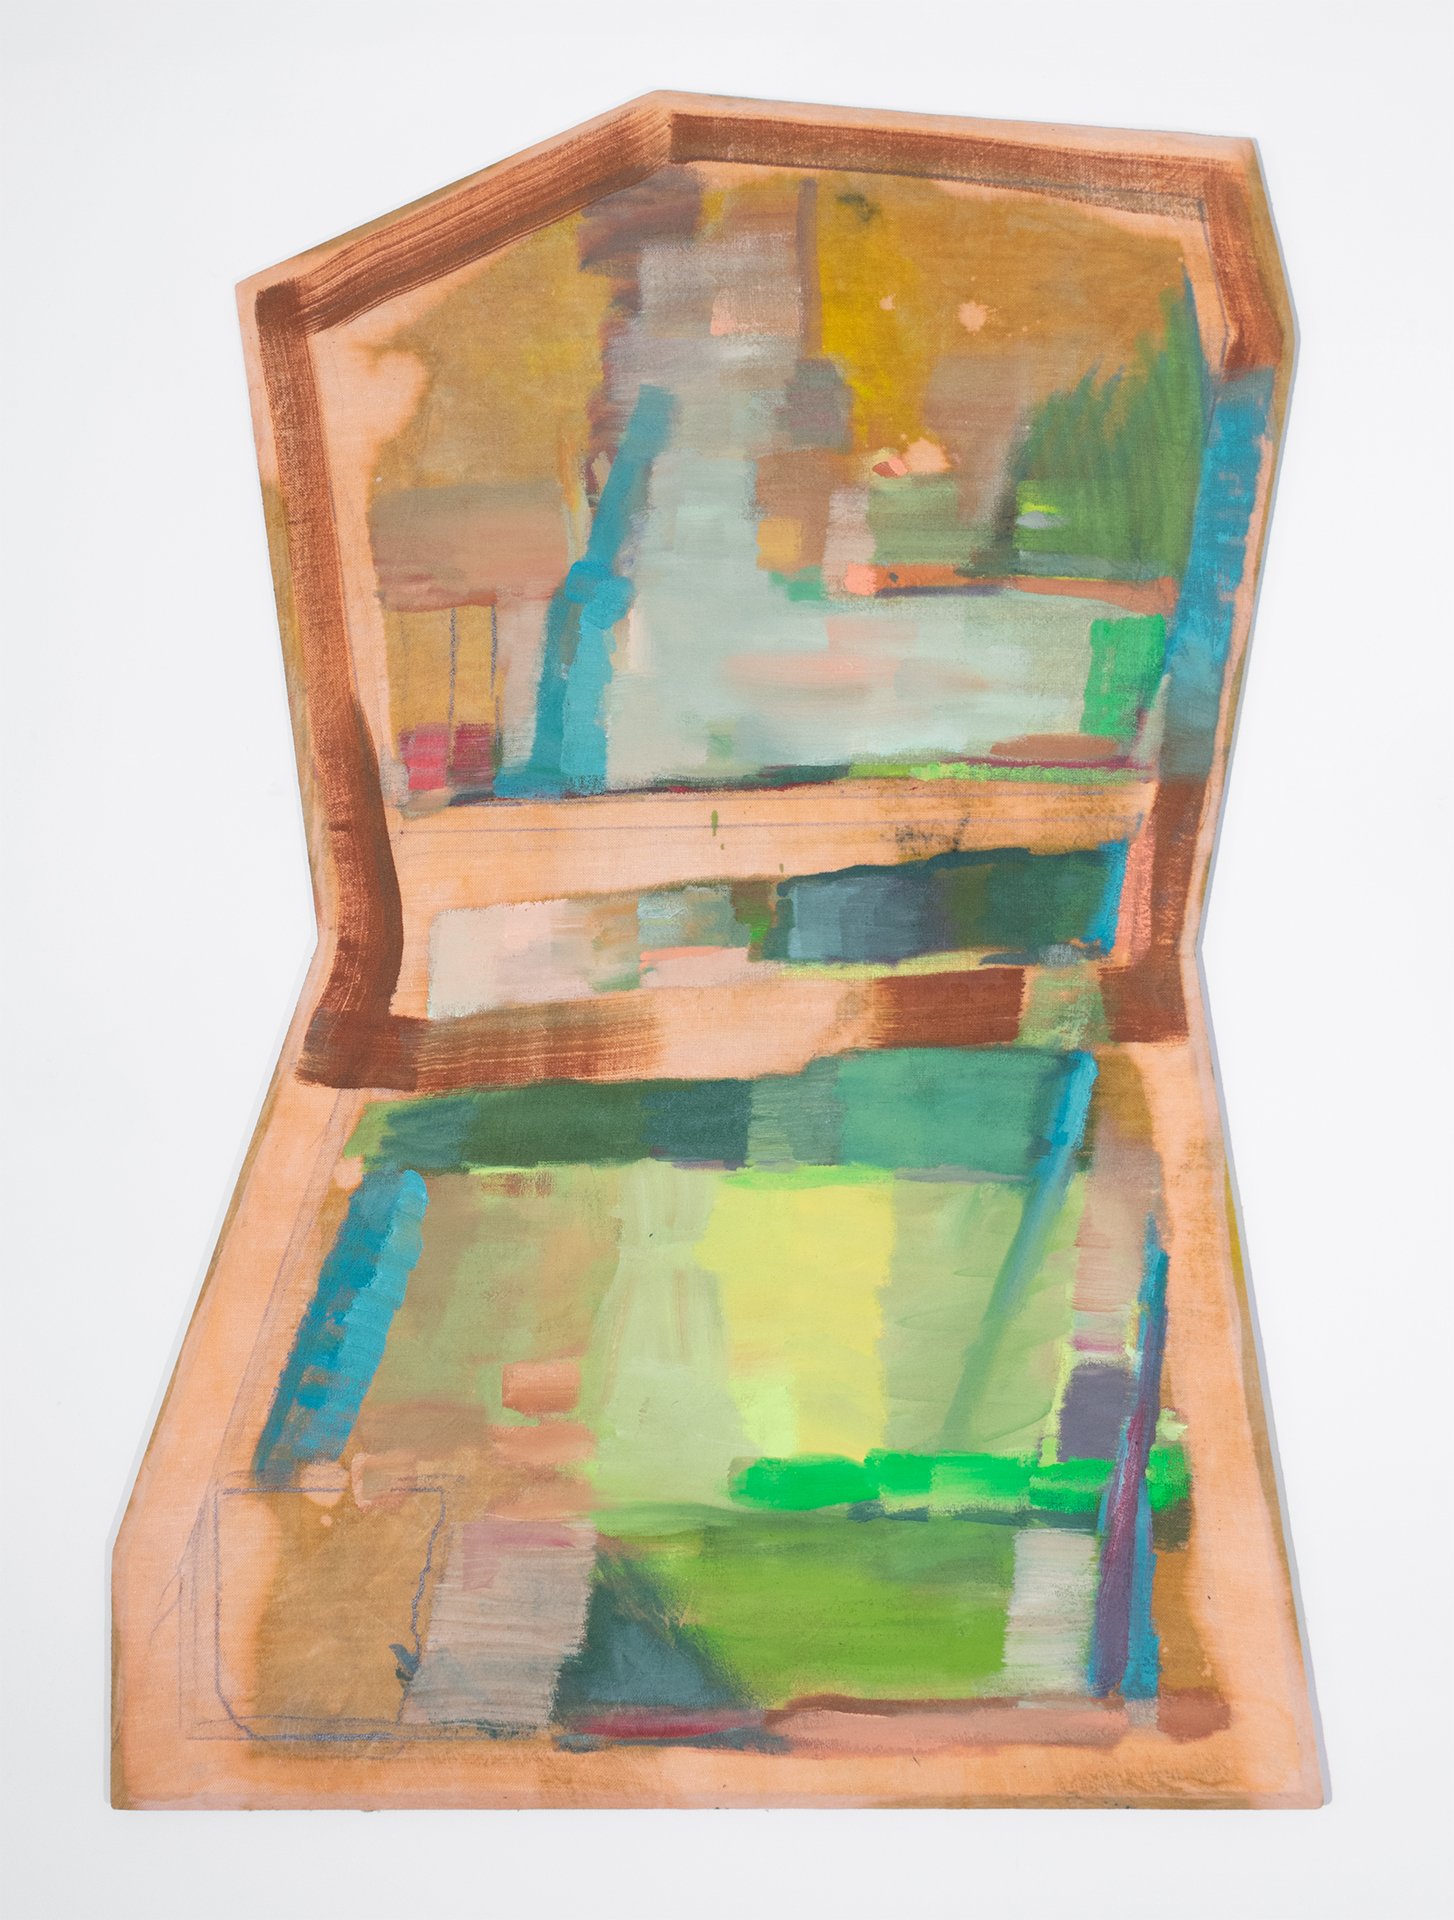  Time Keeper (July), 46 x 28 in., oil, graphite, dye, and bleach on linen with beveled pine, 2022 